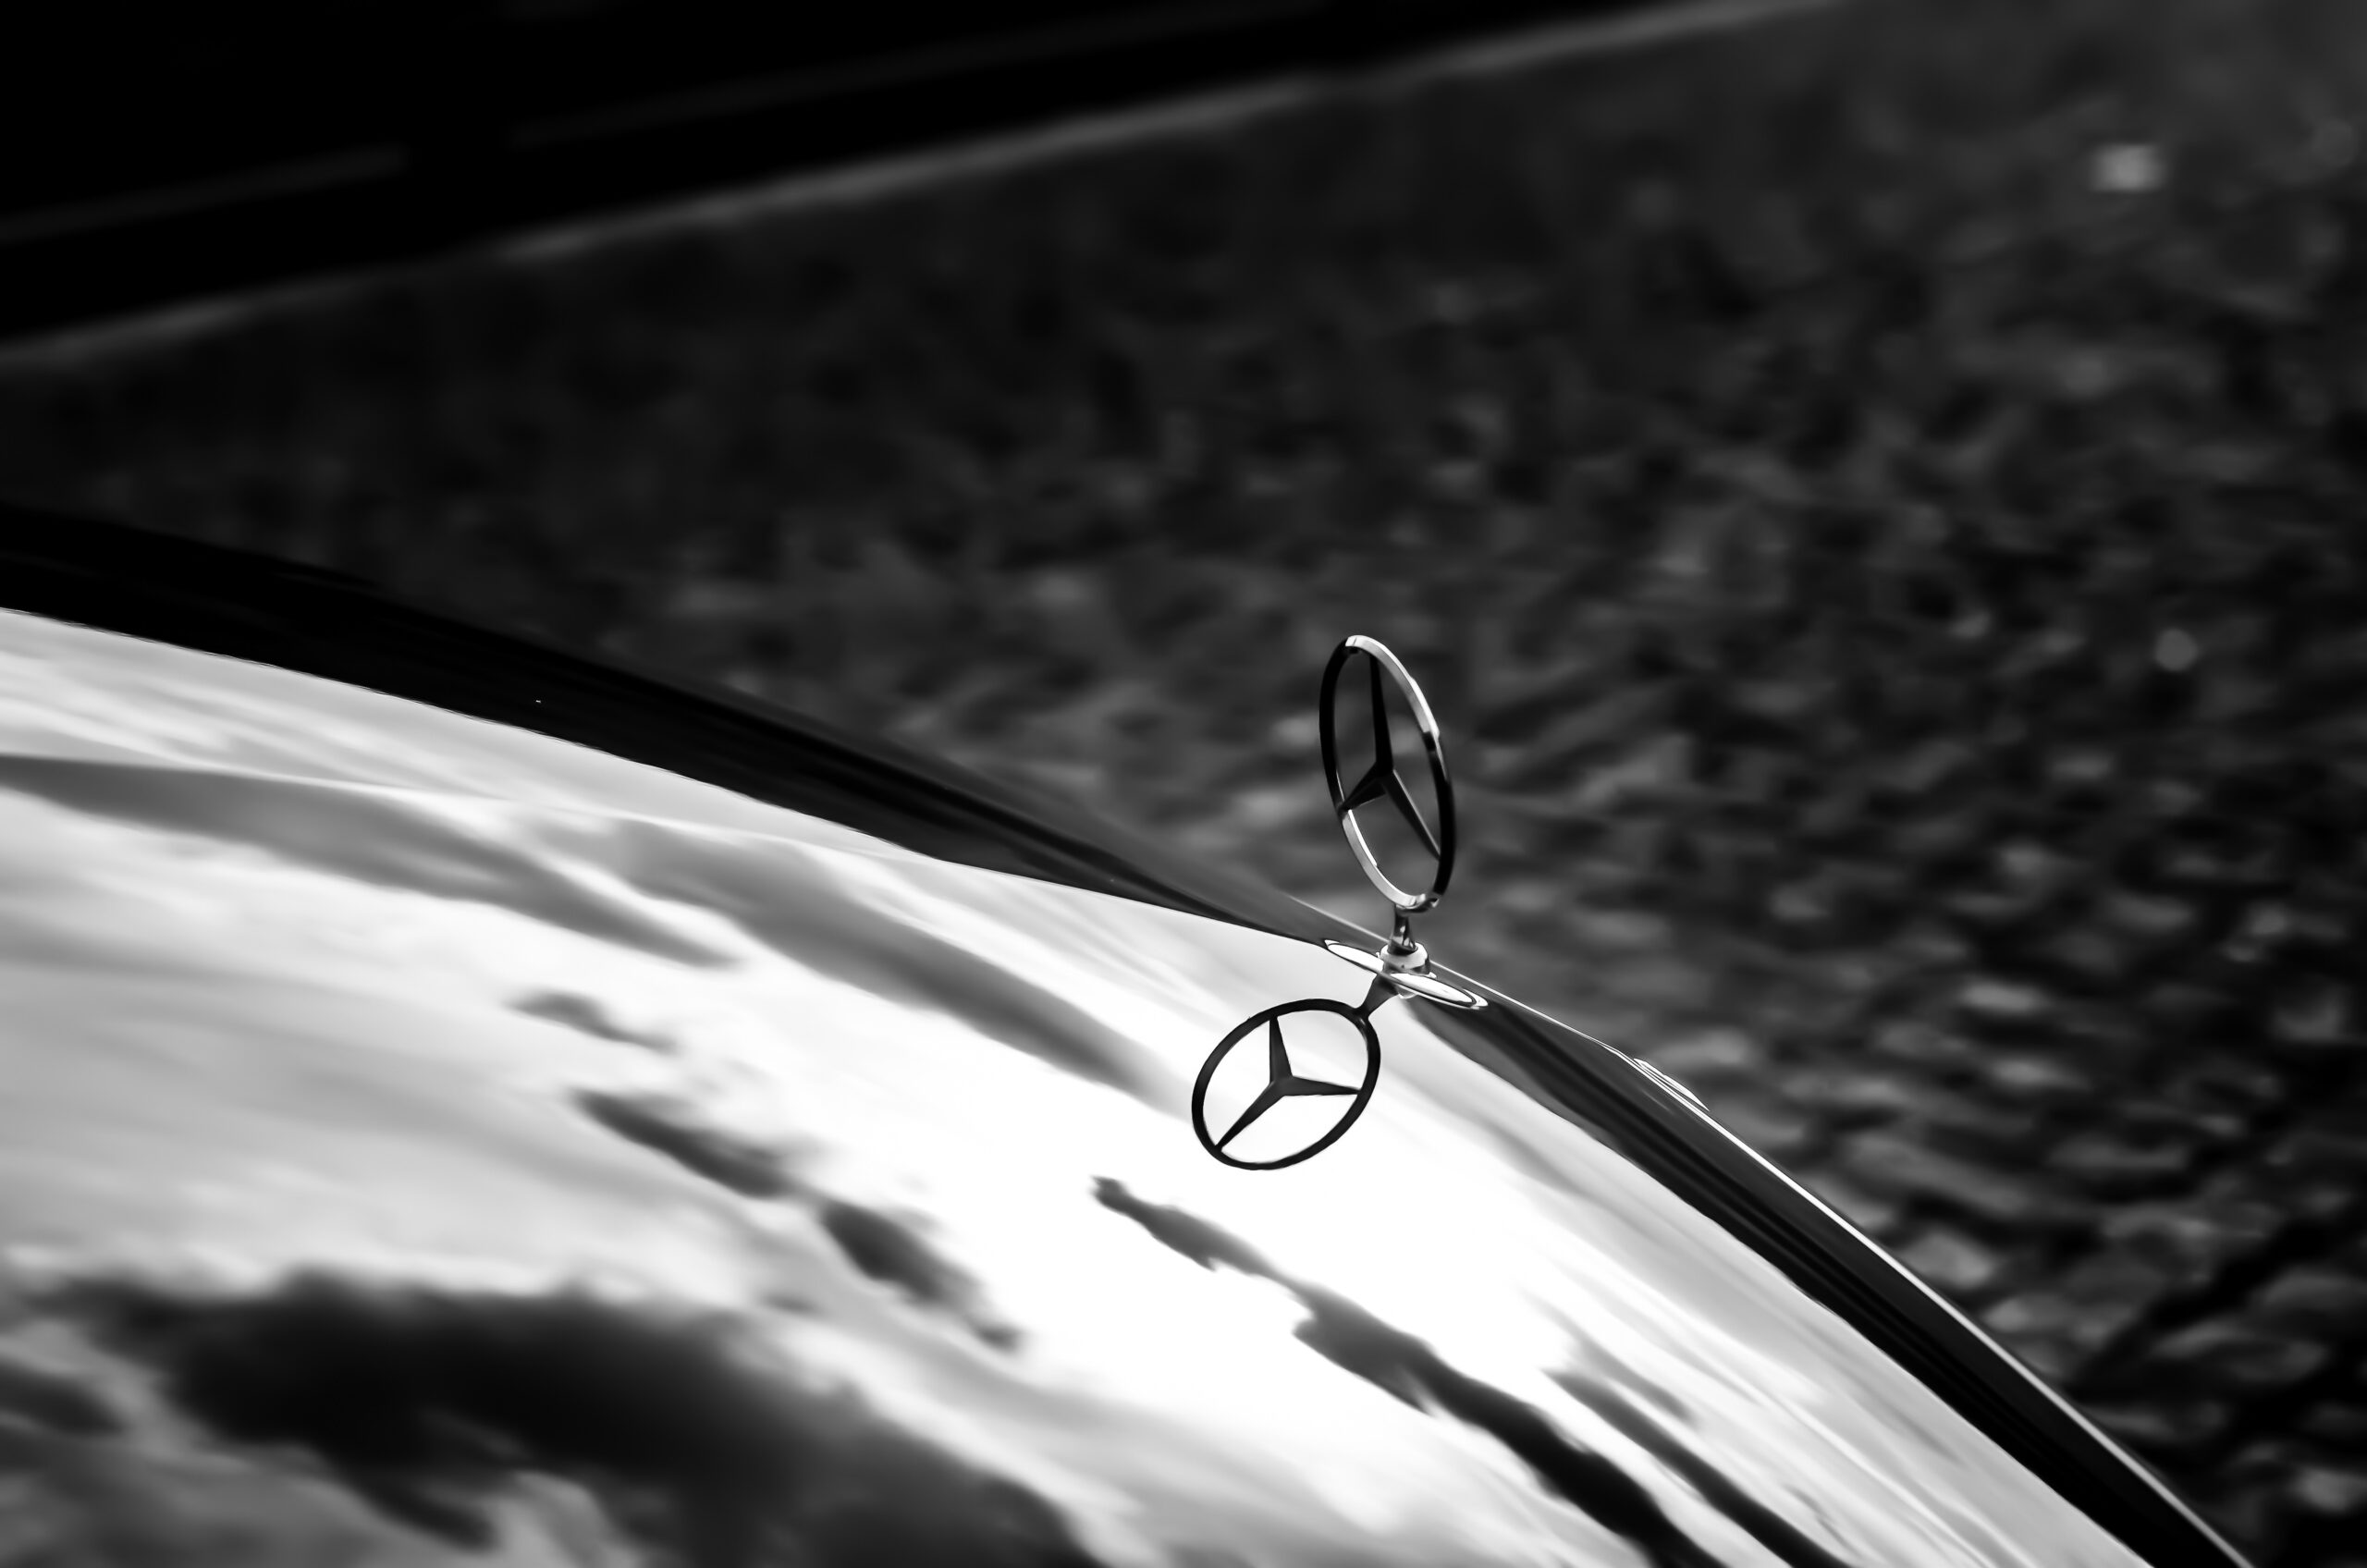 Mercedes-Benz and H2 Green Steel Forge Sustainable Partnership for Virtually CO2-Free Steel Production